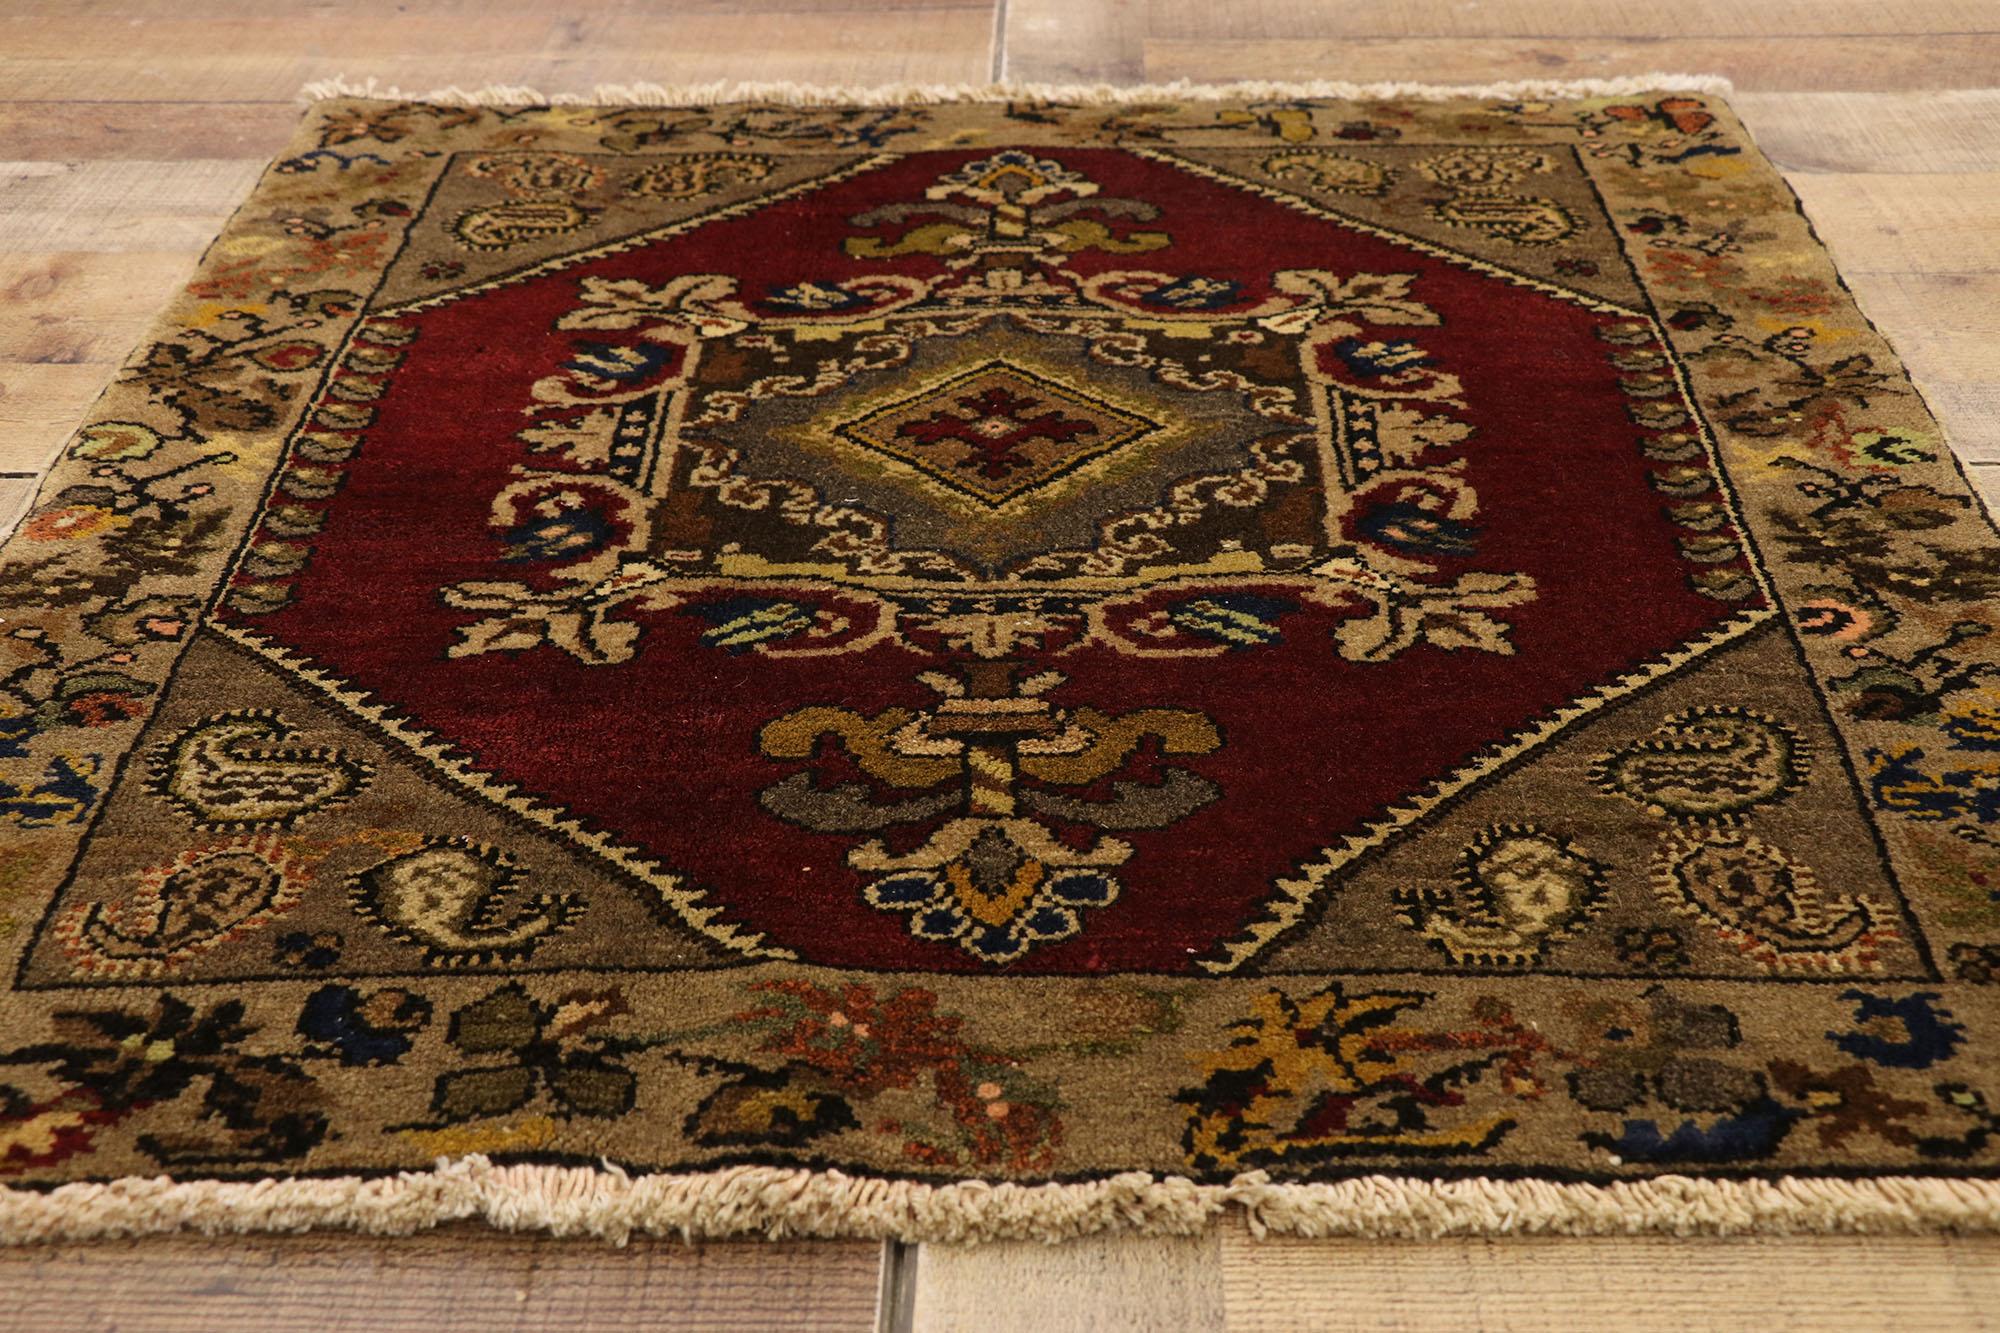 Pair of Vintage Turkish Oushak Yastik Scatter Rugs, Matching Small Accent Rugs 1